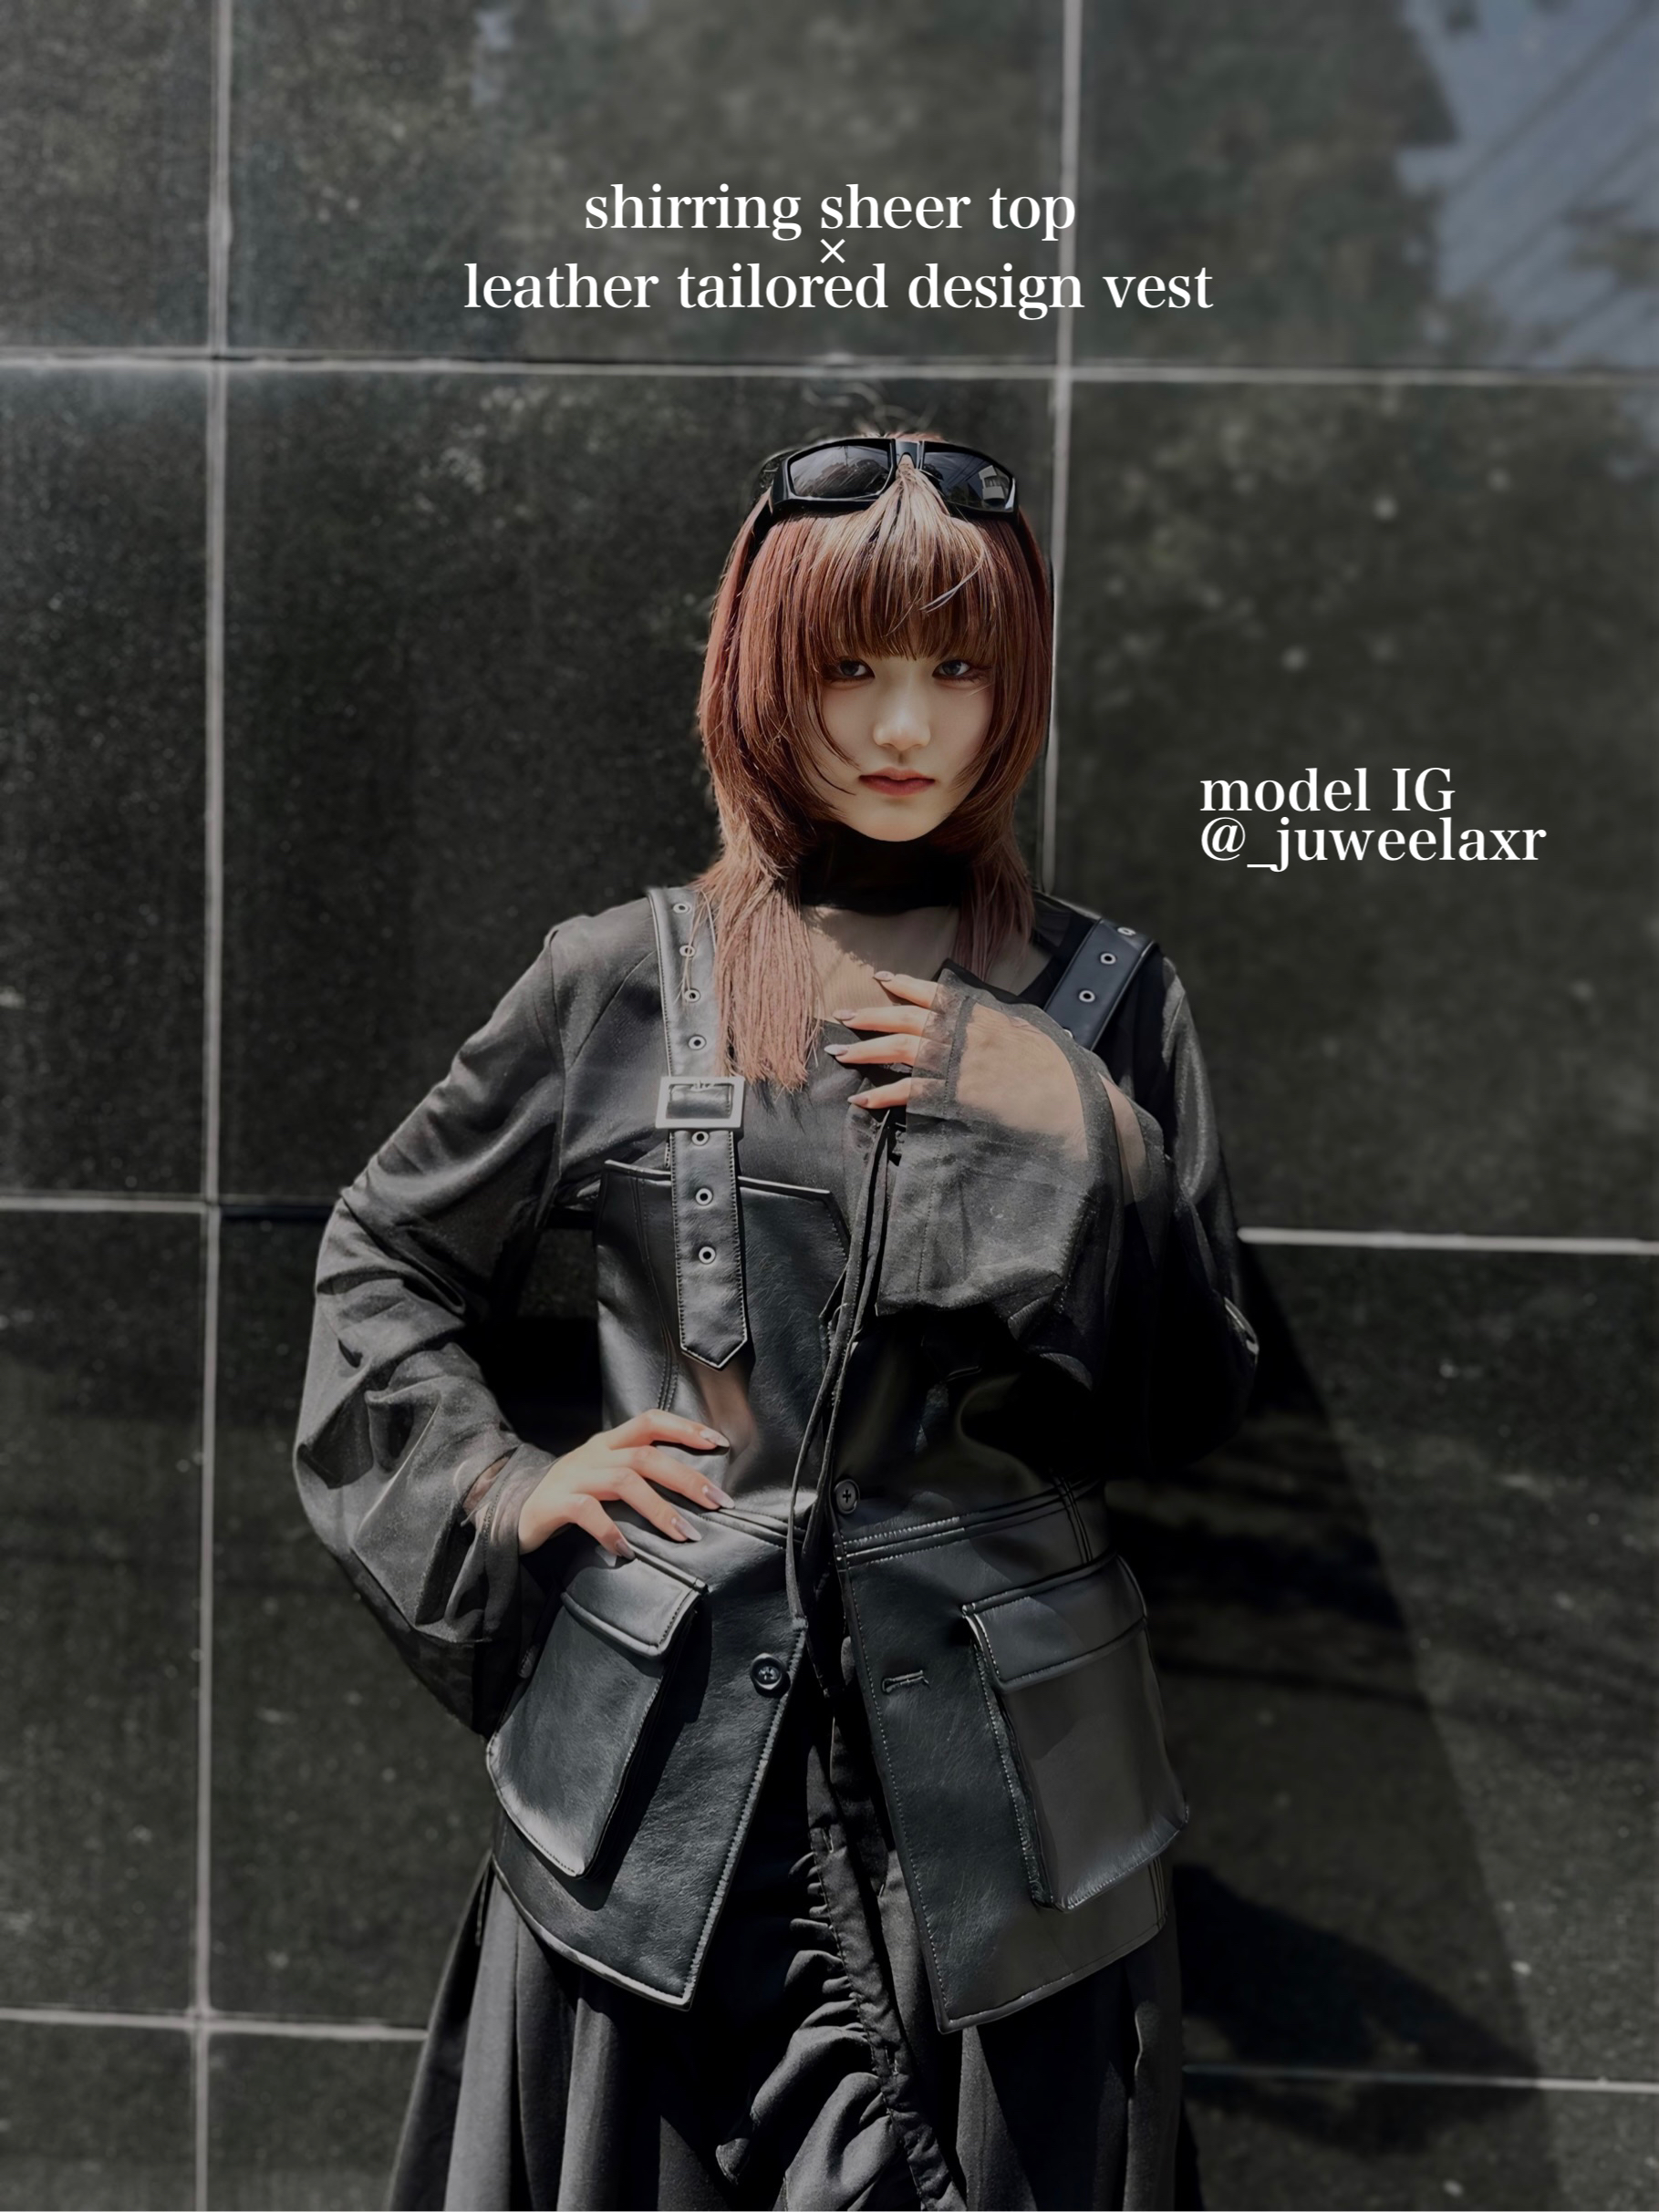 shirring sheer top × leather tailored design vest